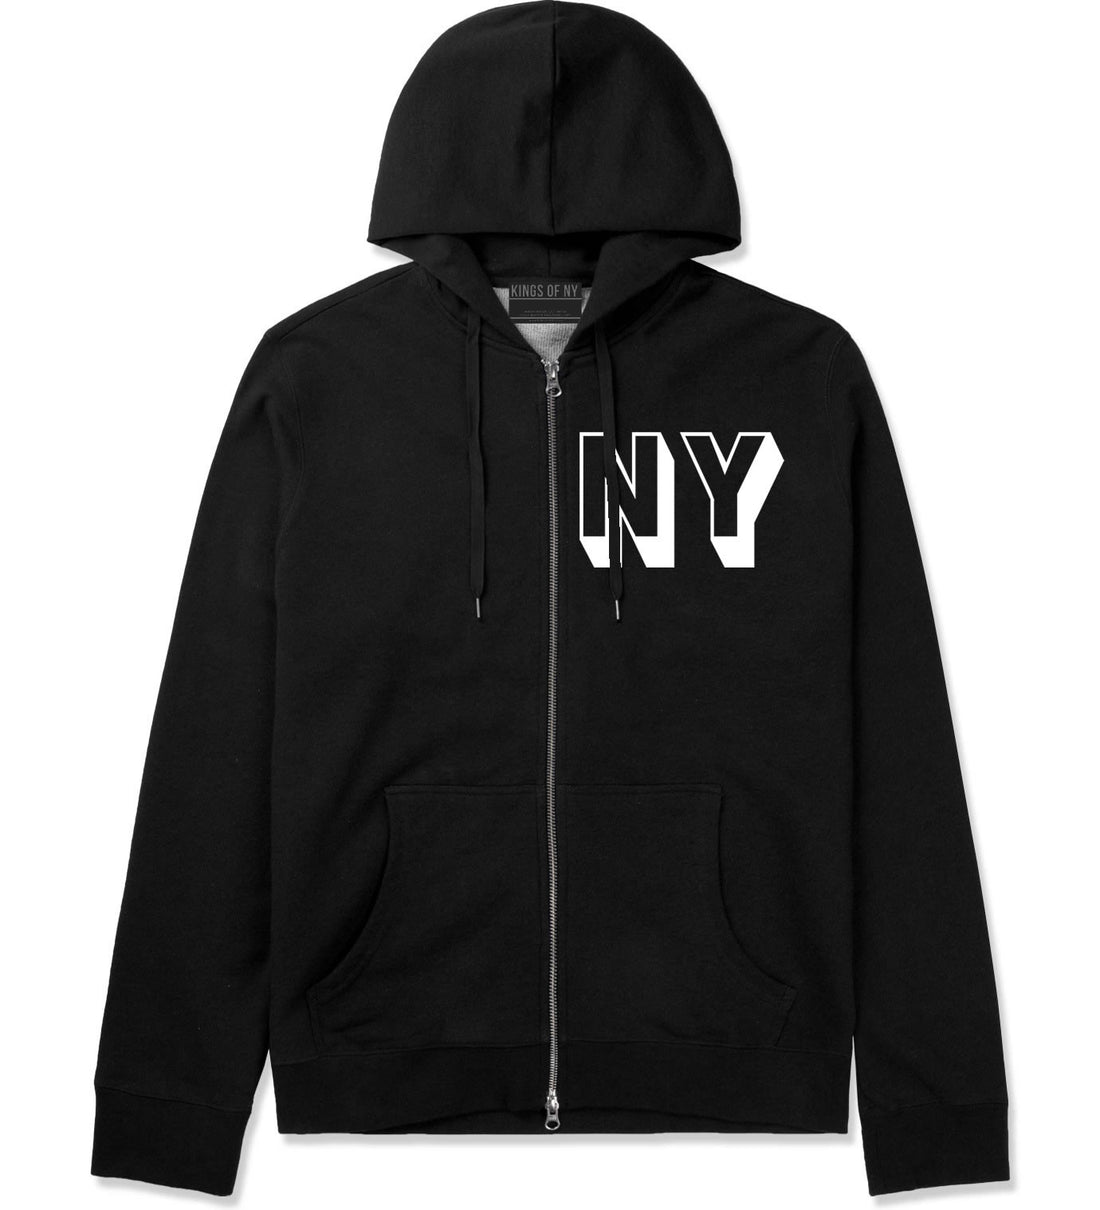 NY Block Letter New York Zip Up Hoodie in Black By Kings Of NY